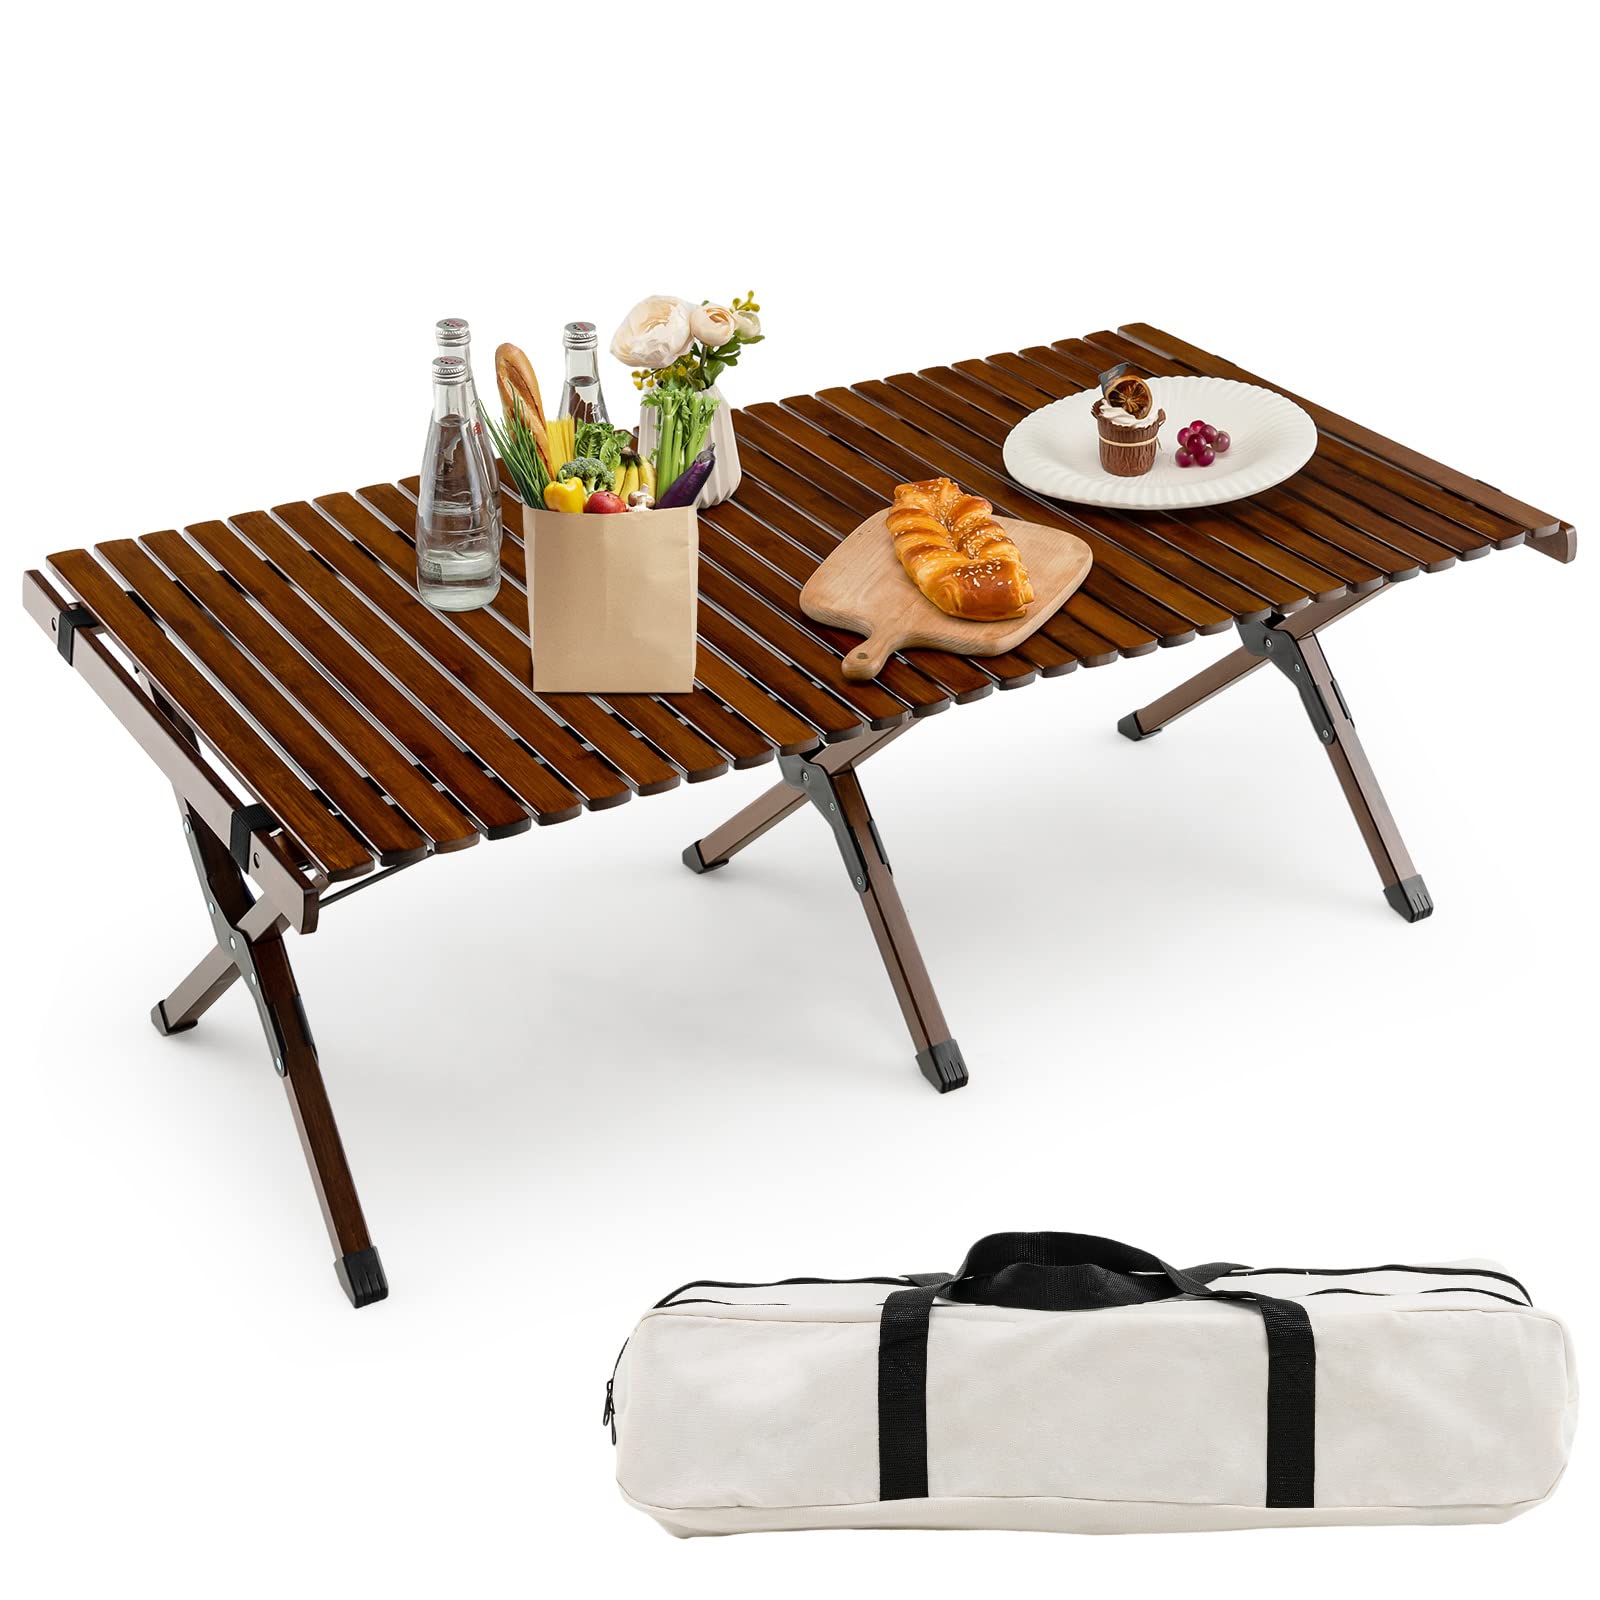 Giantex Folding Picnic Table, Wooden Roll-up Bamboo Tabletop, Portable Camping Table